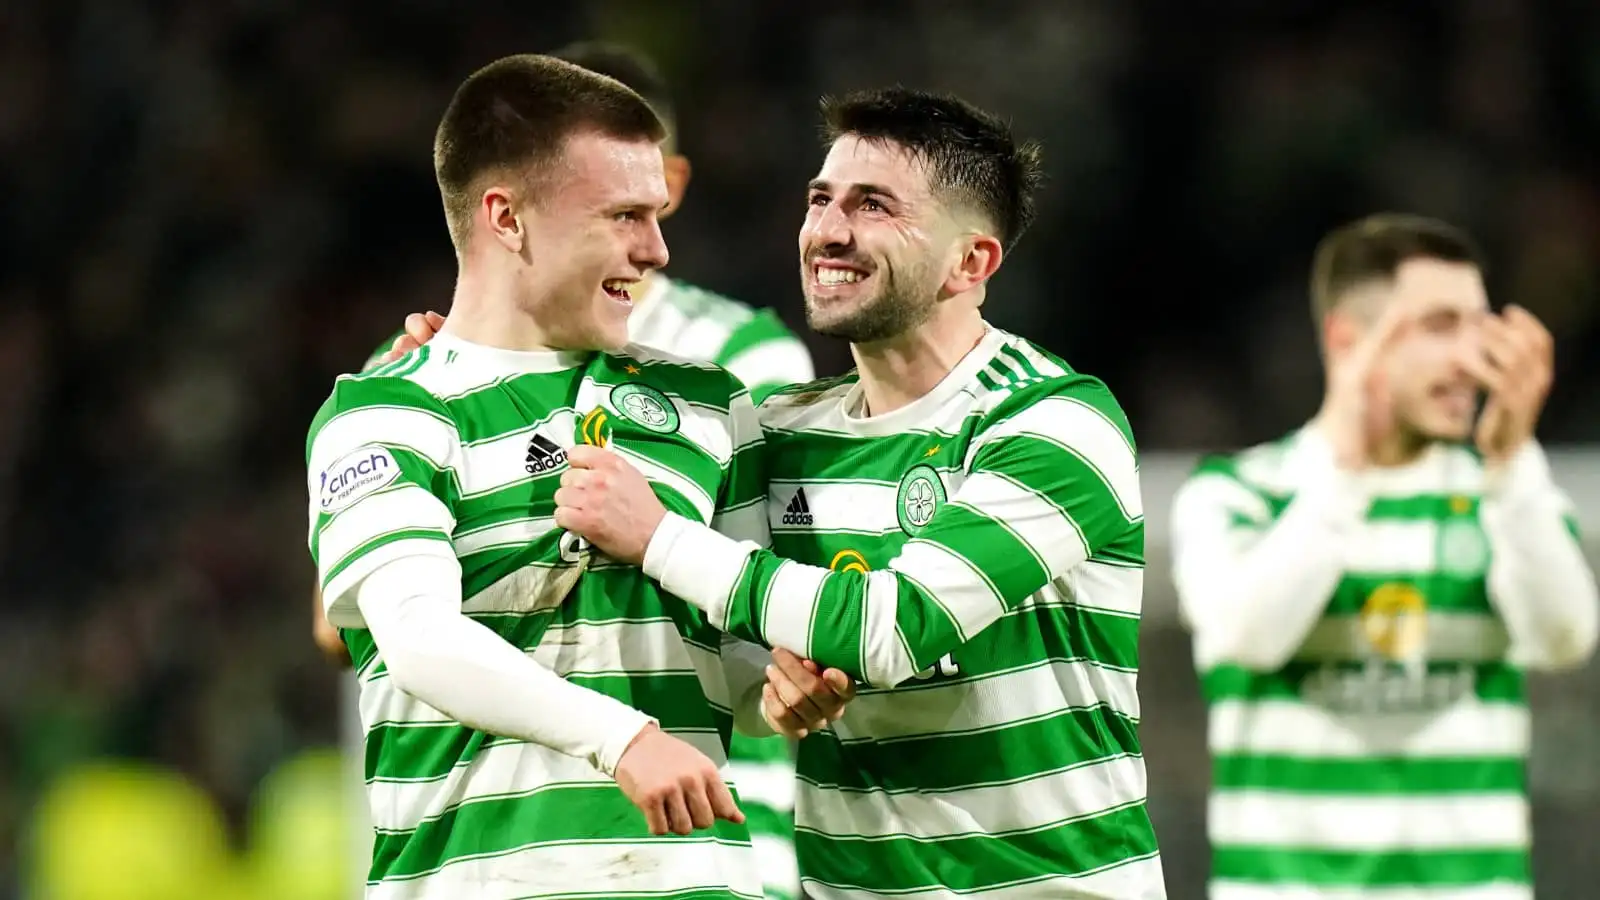 Celtic's current strongest Day 1 starting XI with new signings imminent